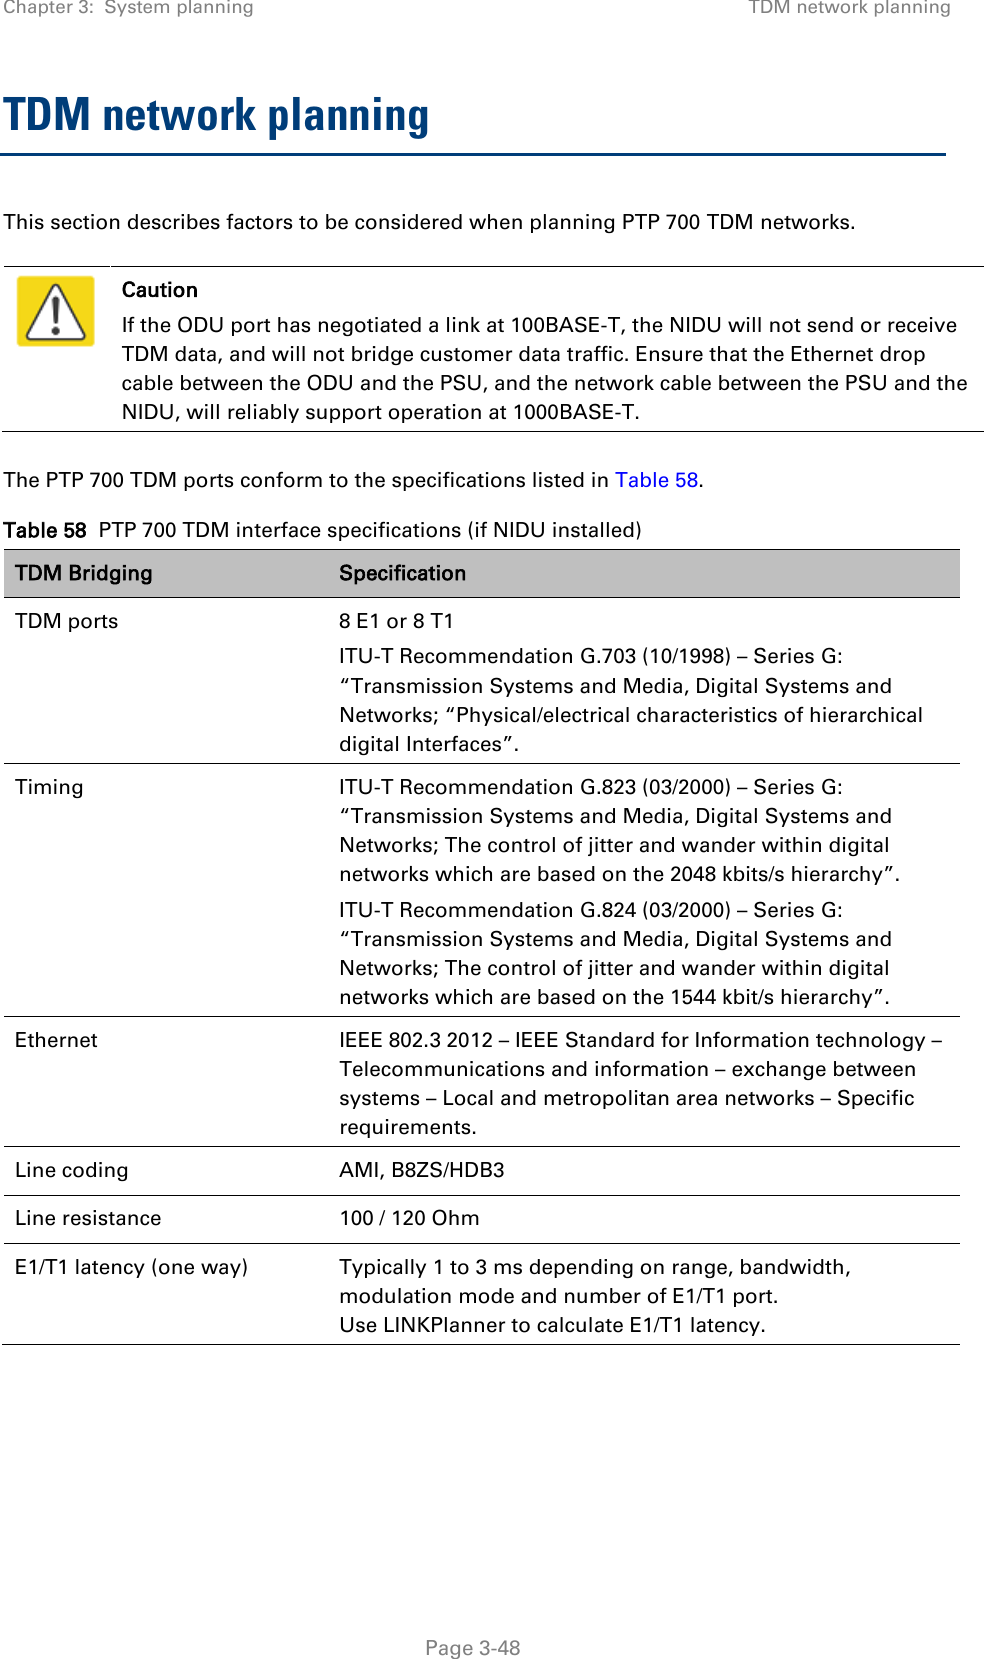 Chapter 3:  System planning TDM network planning  TDM network planning This section describes factors to be considered when planning PTP 700 TDM networks.   Caution If the ODU port has negotiated a link at 100BASE-T, the NIDU will not send or receive TDM data, and will not bridge customer data traffic. Ensure that the Ethernet drop cable between the ODU and the PSU, and the network cable between the PSU and the NIDU, will reliably support operation at 1000BASE-T.  The PTP 700 TDM ports conform to the specifications listed in Table 58. Table 58  PTP 700 TDM interface specifications (if NIDU installed) TDM Bridging  Specification TDM ports 8 E1 or 8 T1 ITU-T Recommendation G.703 (10/1998) – Series G: “Transmission Systems and Media, Digital Systems and Networks; “Physical/electrical characteristics of hierarchical digital Interfaces”. Timing ITU-T Recommendation G.823 (03/2000) – Series G: “Transmission Systems and Media, Digital Systems and Networks; The control of jitter and wander within digital networks which are based on the 2048 kbits/s hierarchy”. ITU-T Recommendation G.824 (03/2000) – Series G: “Transmission Systems and Media, Digital Systems and Networks; The control of jitter and wander within digital networks which are based on the 1544 kbit/s hierarchy”. Ethernet IEEE 802.3 2012 – IEEE Standard for Information technology – Telecommunications and information – exchange between systems – Local and metropolitan area networks – Specific requirements. Line coding AMI, B8ZS/HDB3 Line resistance 100 / 120 Ohm E1/T1 latency (one way) Typically 1 to 3 ms depending on range, bandwidth, modulation mode and number of E1/T1 port. Use LINKPlanner to calculate E1/T1 latency.    Page 3-48 